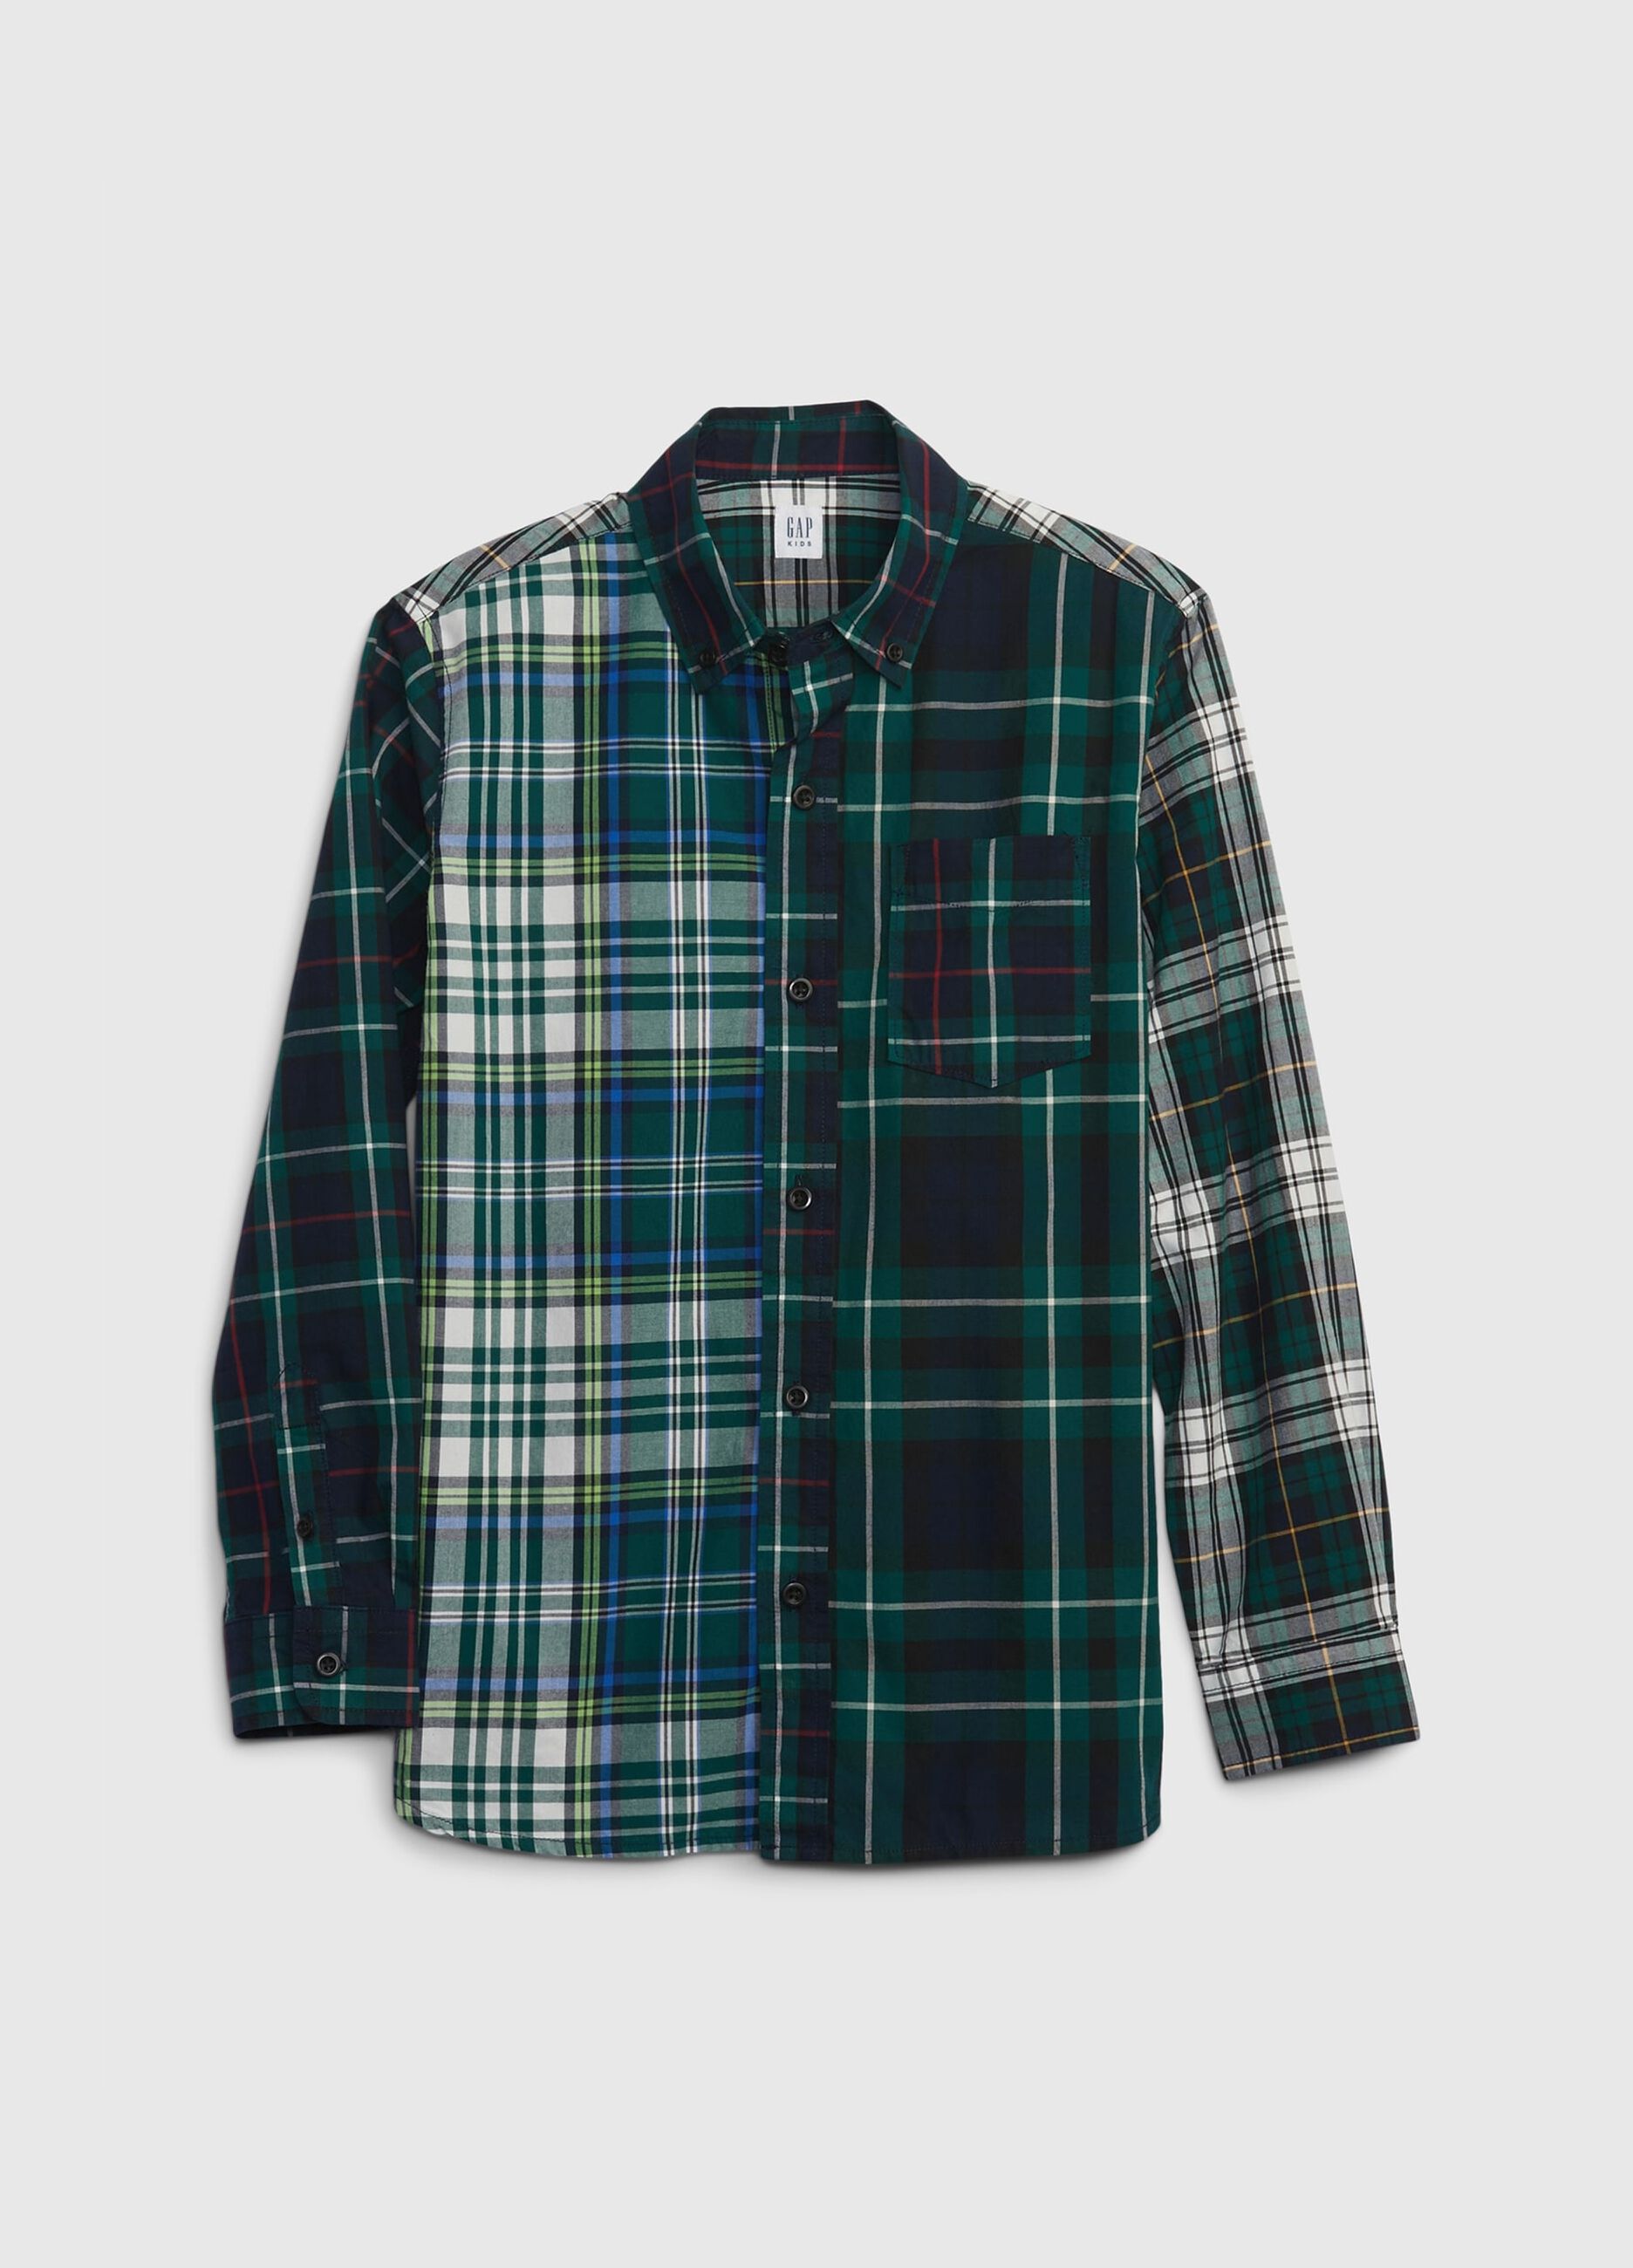 Cotton shirt with plaid pattern